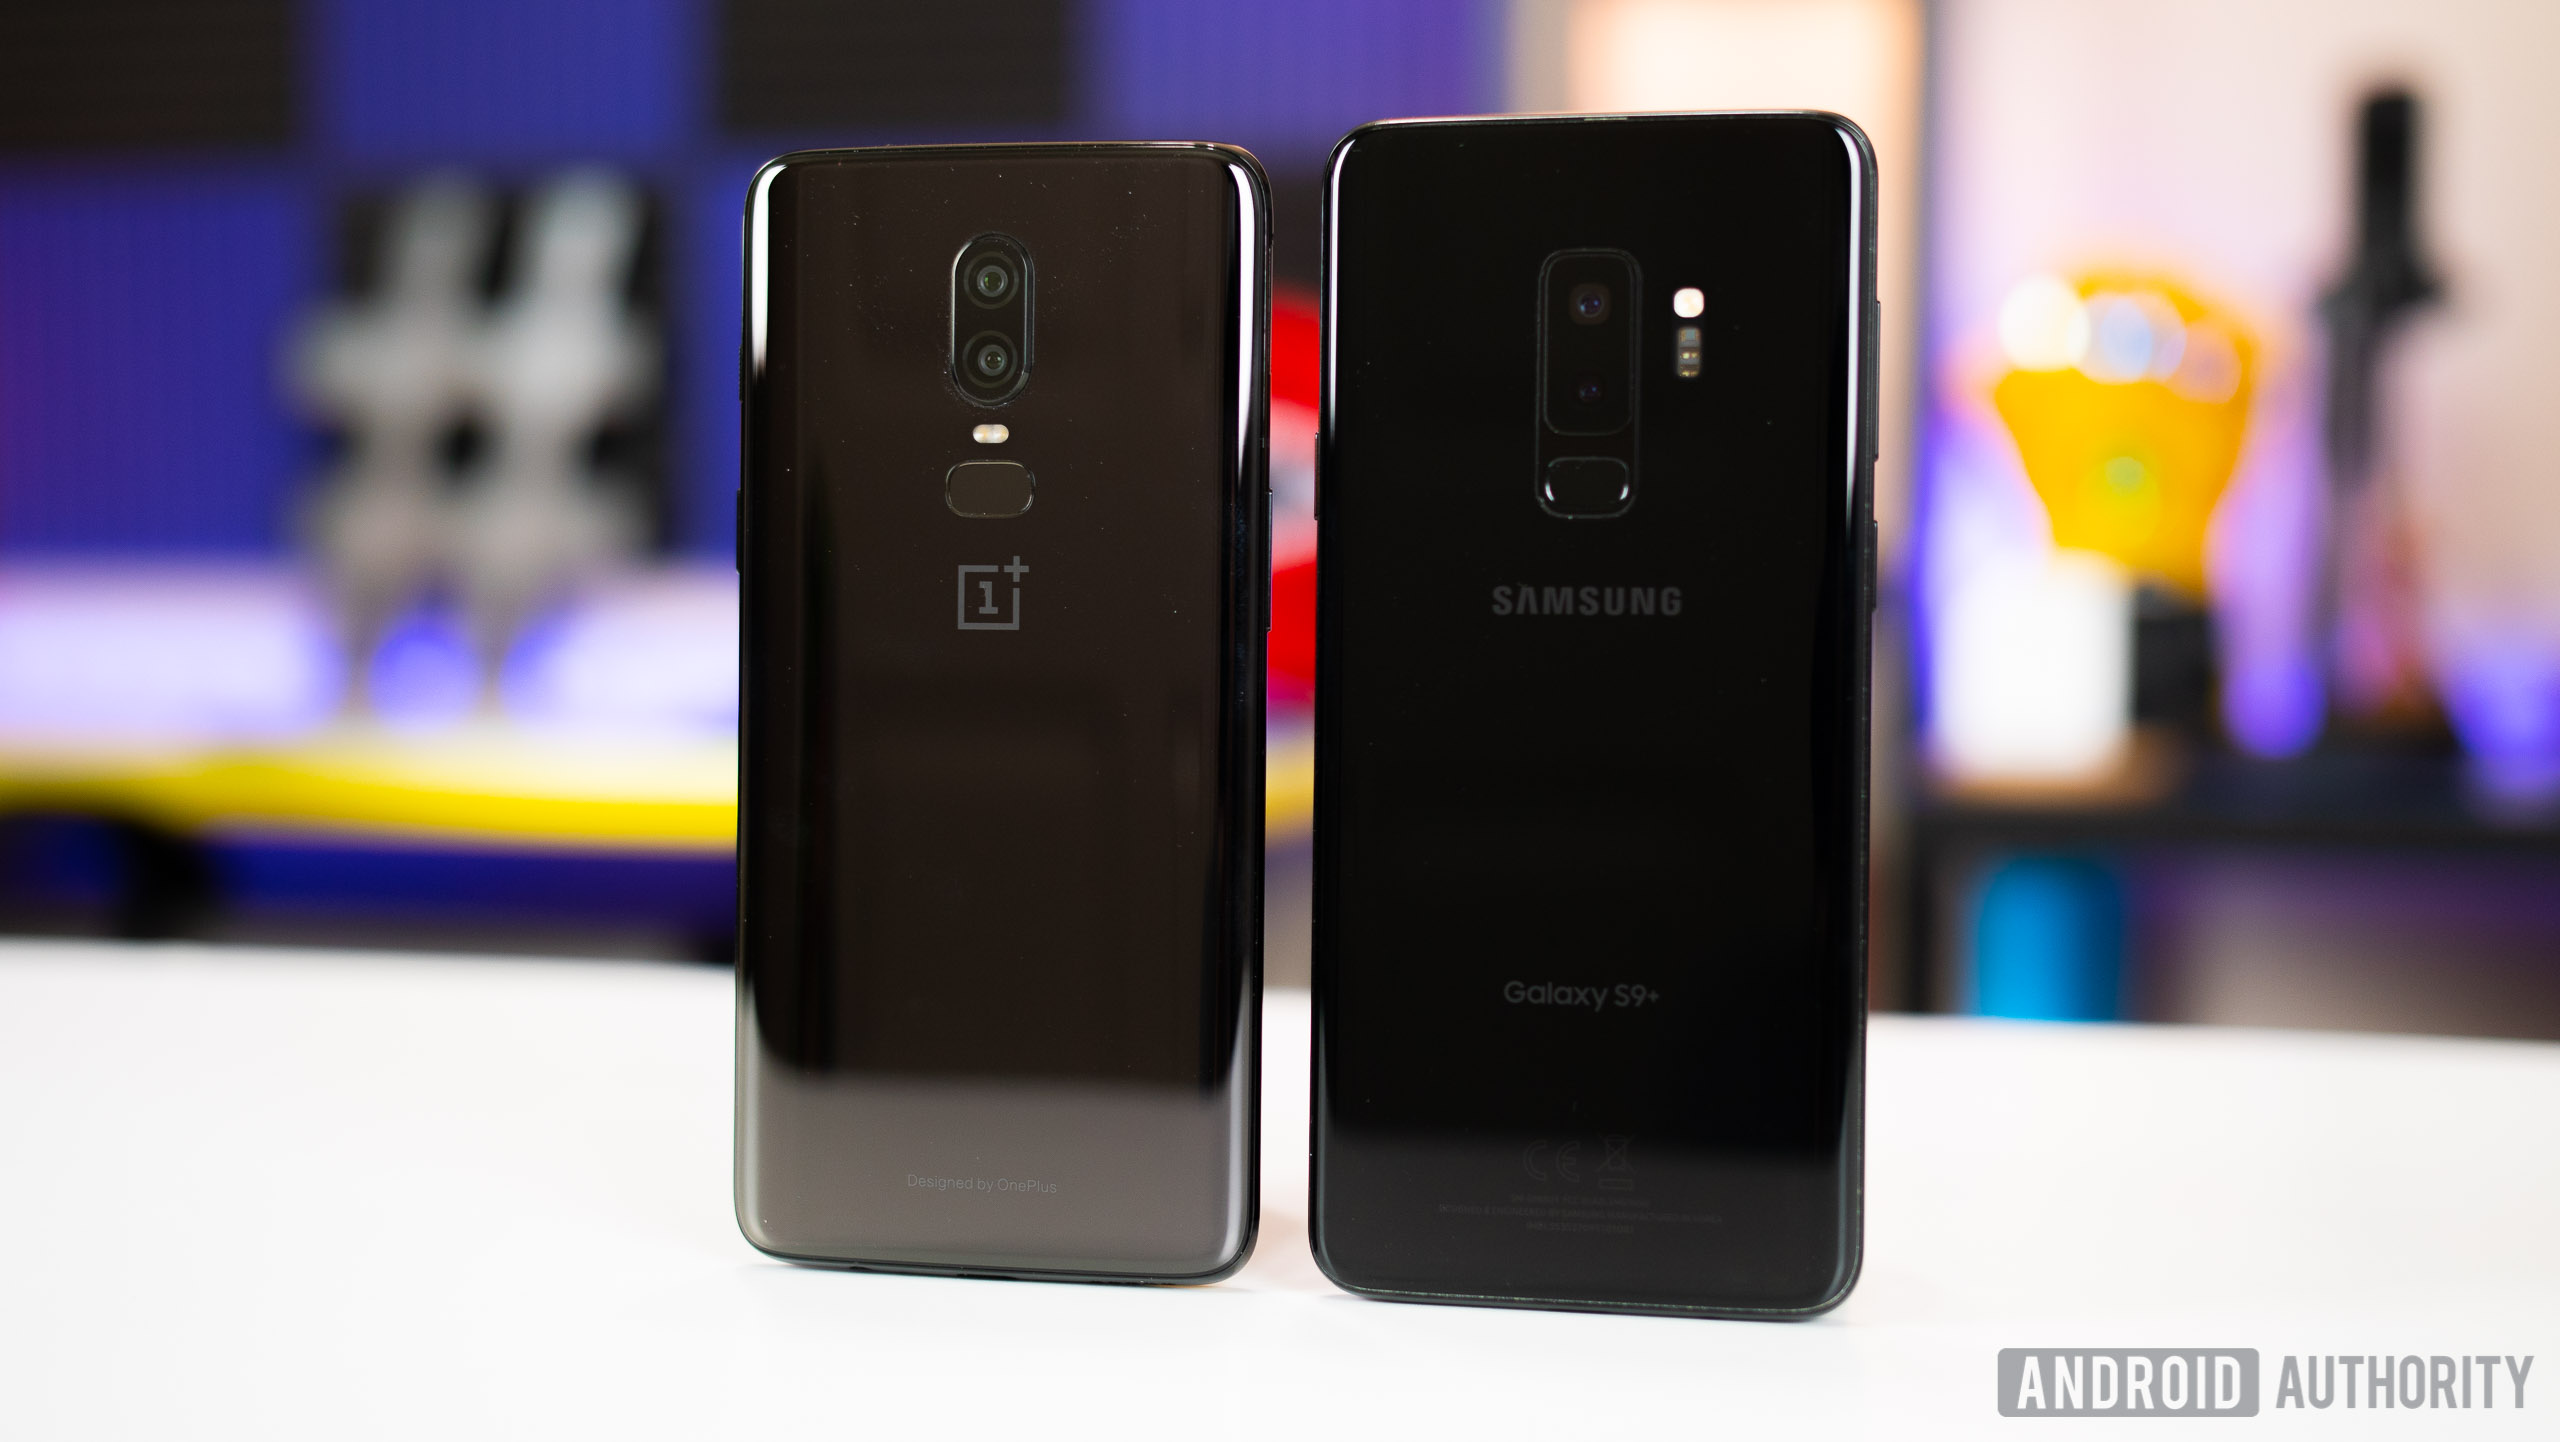 OnePlus 6 to the left, Galaxy S9 Plus to the right